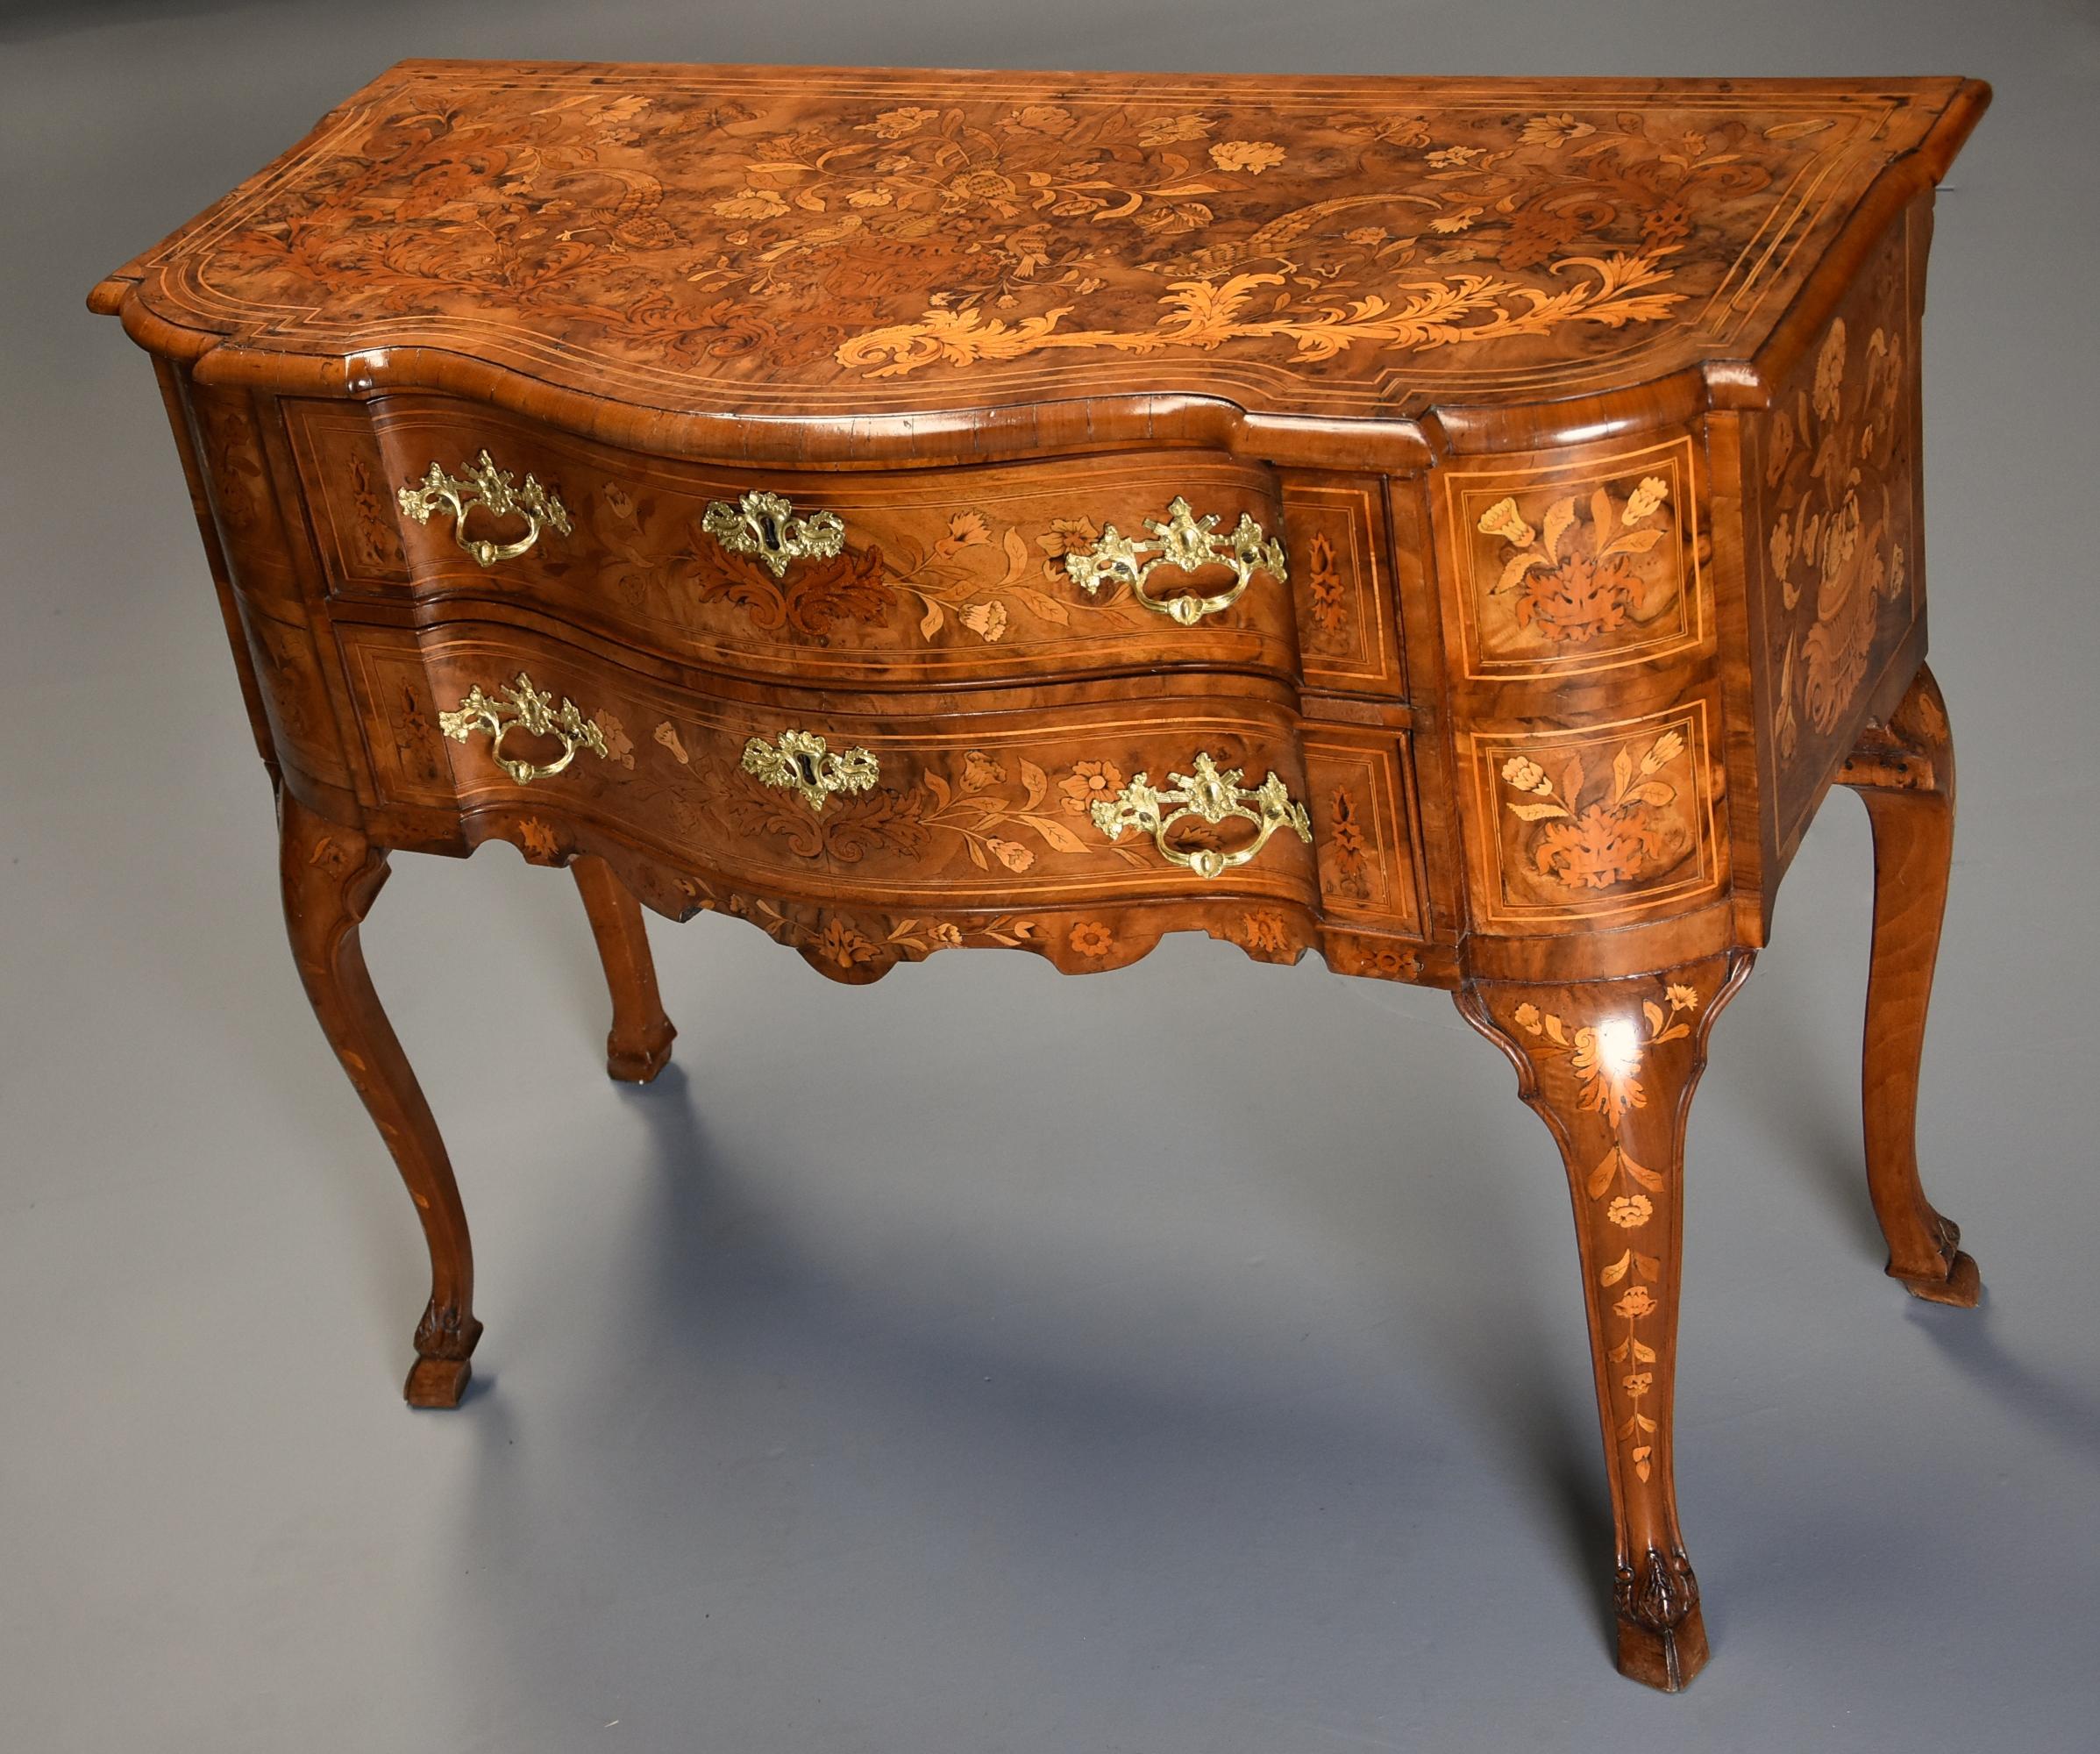 Fine Quality Mid-19th Century Floral Marquetry Walnut Lowboy of Serpentine Form For Sale 7